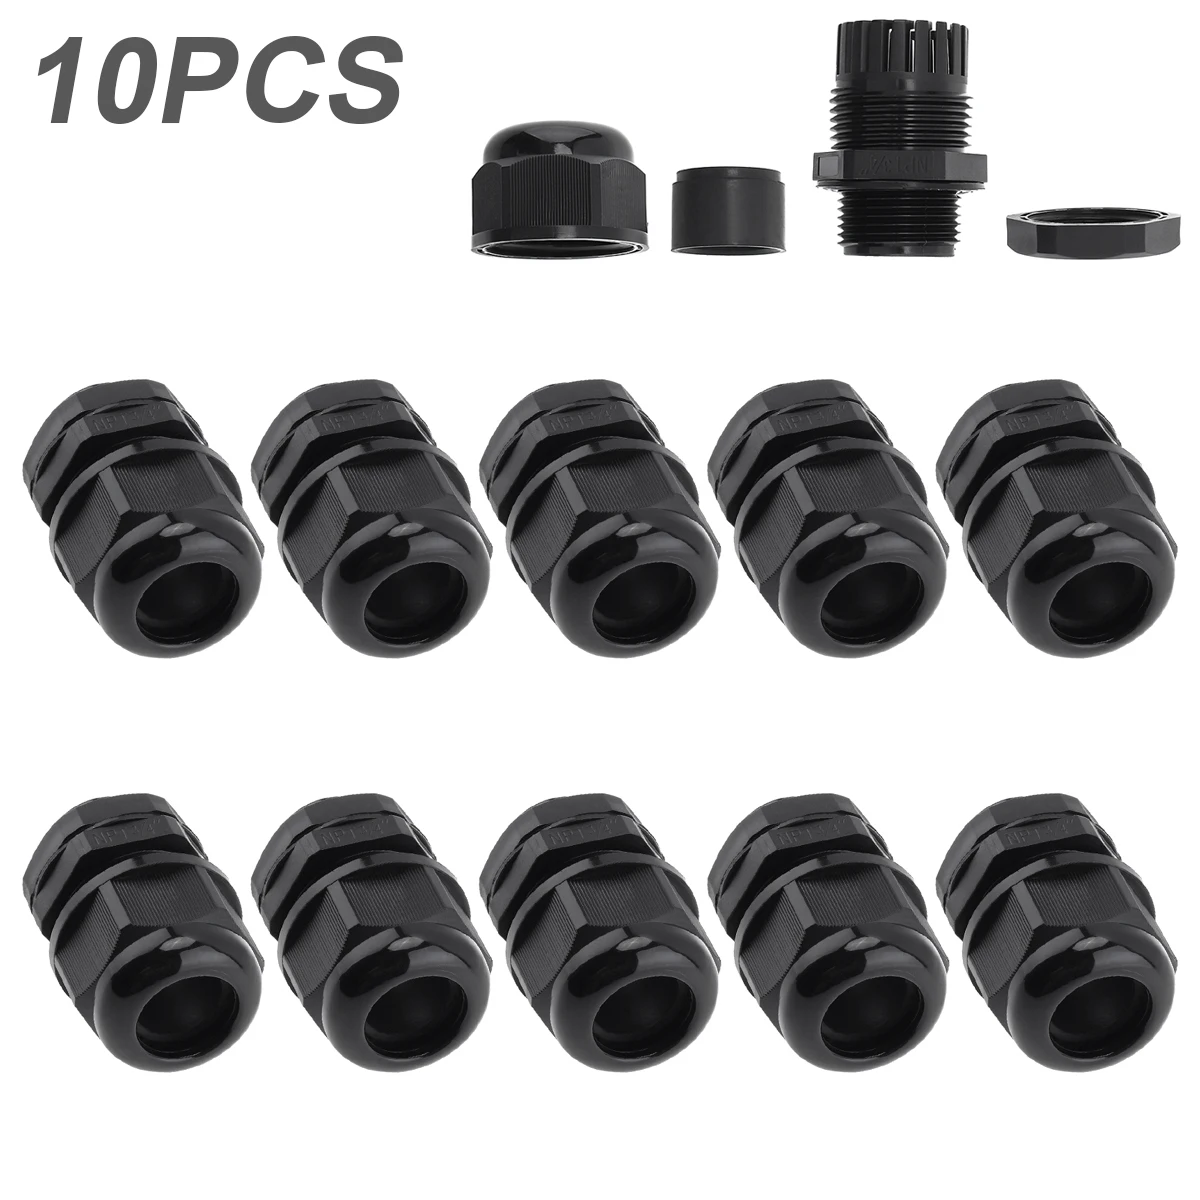 

Waterproof Cable Gland 10pcs Cable Entry IP68 3/4 Inch NPT for 12 -18mm Wire Cable Nylon Black Connector Connection Fixing Head